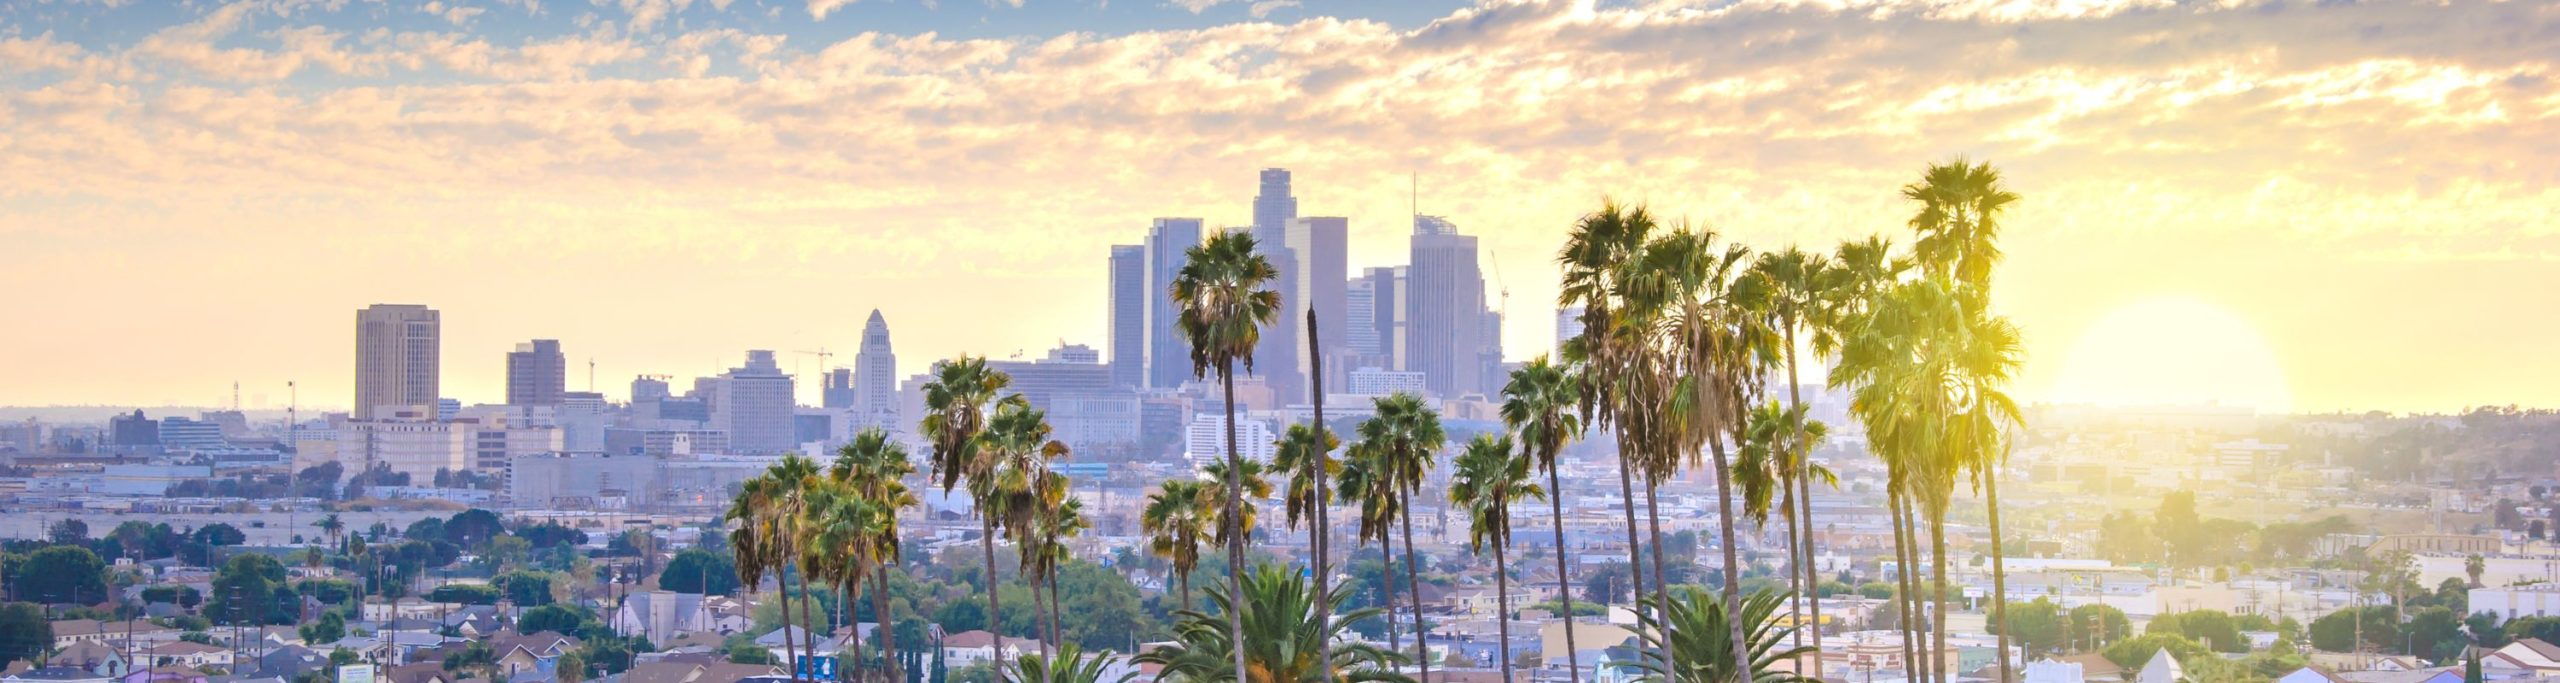 Attractions in Los Angeles Image of Los Angeles Skyline